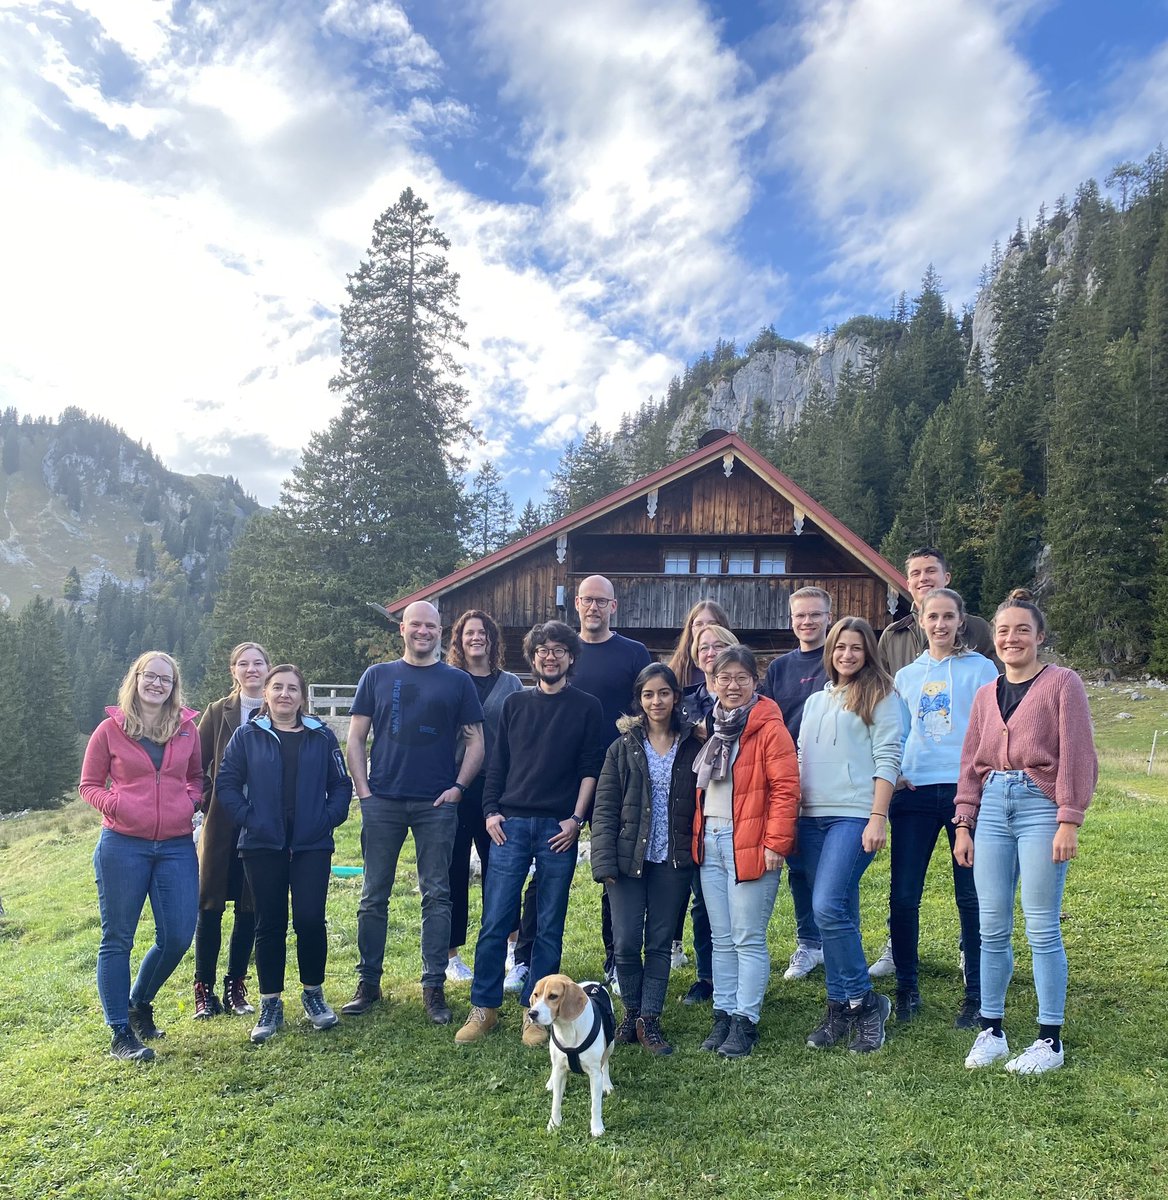 Discussing past-present-future at our lab retreat at #ObereFirstalm at beautiful #Spitzingsee. Many thanks to all team members, @_hannawinter in particular (!!) as well as our guest ‘Keynote speaker’ @kratz_elena from @labs_mann!